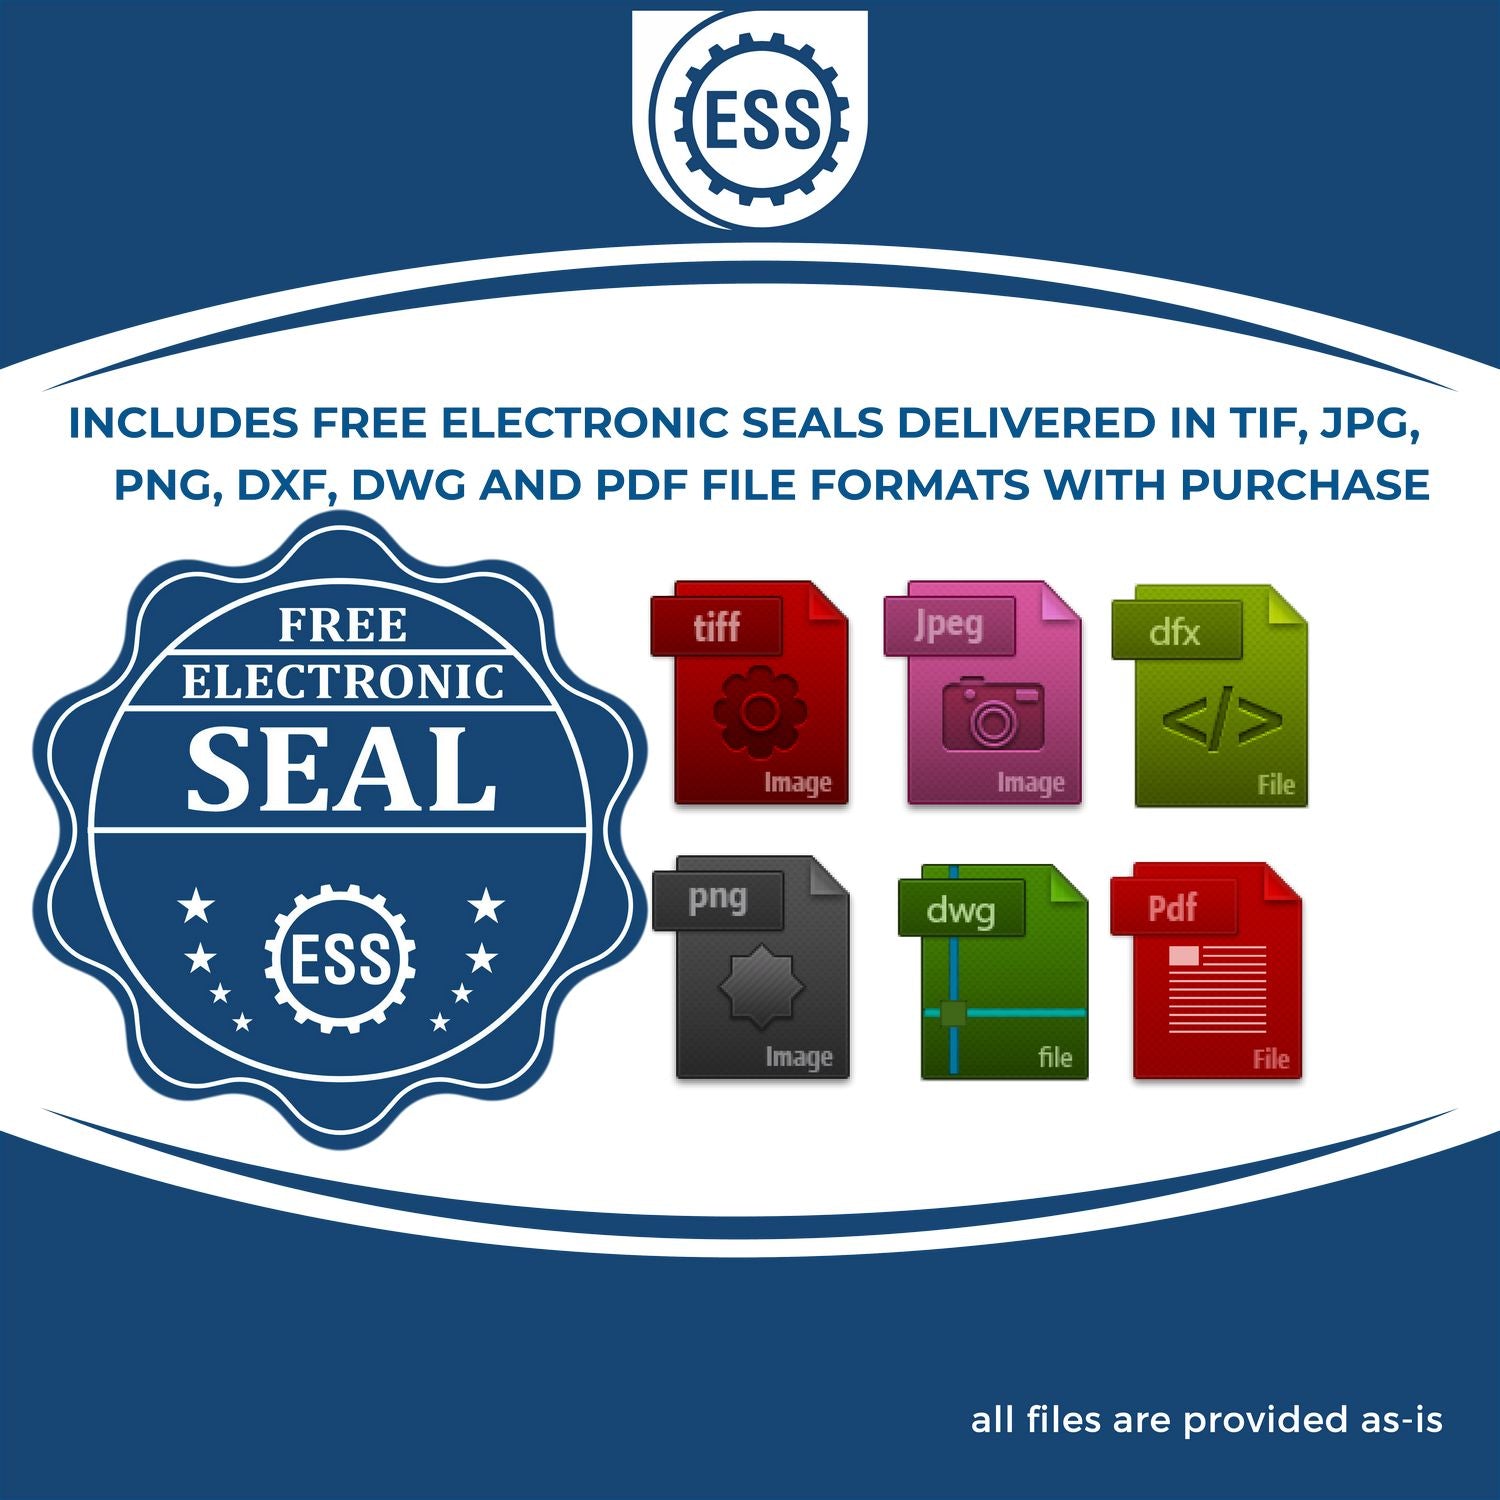 An infographic for the free electronic seal for the Handheld Oklahoma Land Surveyor Seal illustrating the different file type icons such as DXF, DWG, TIF, JPG and PNG.